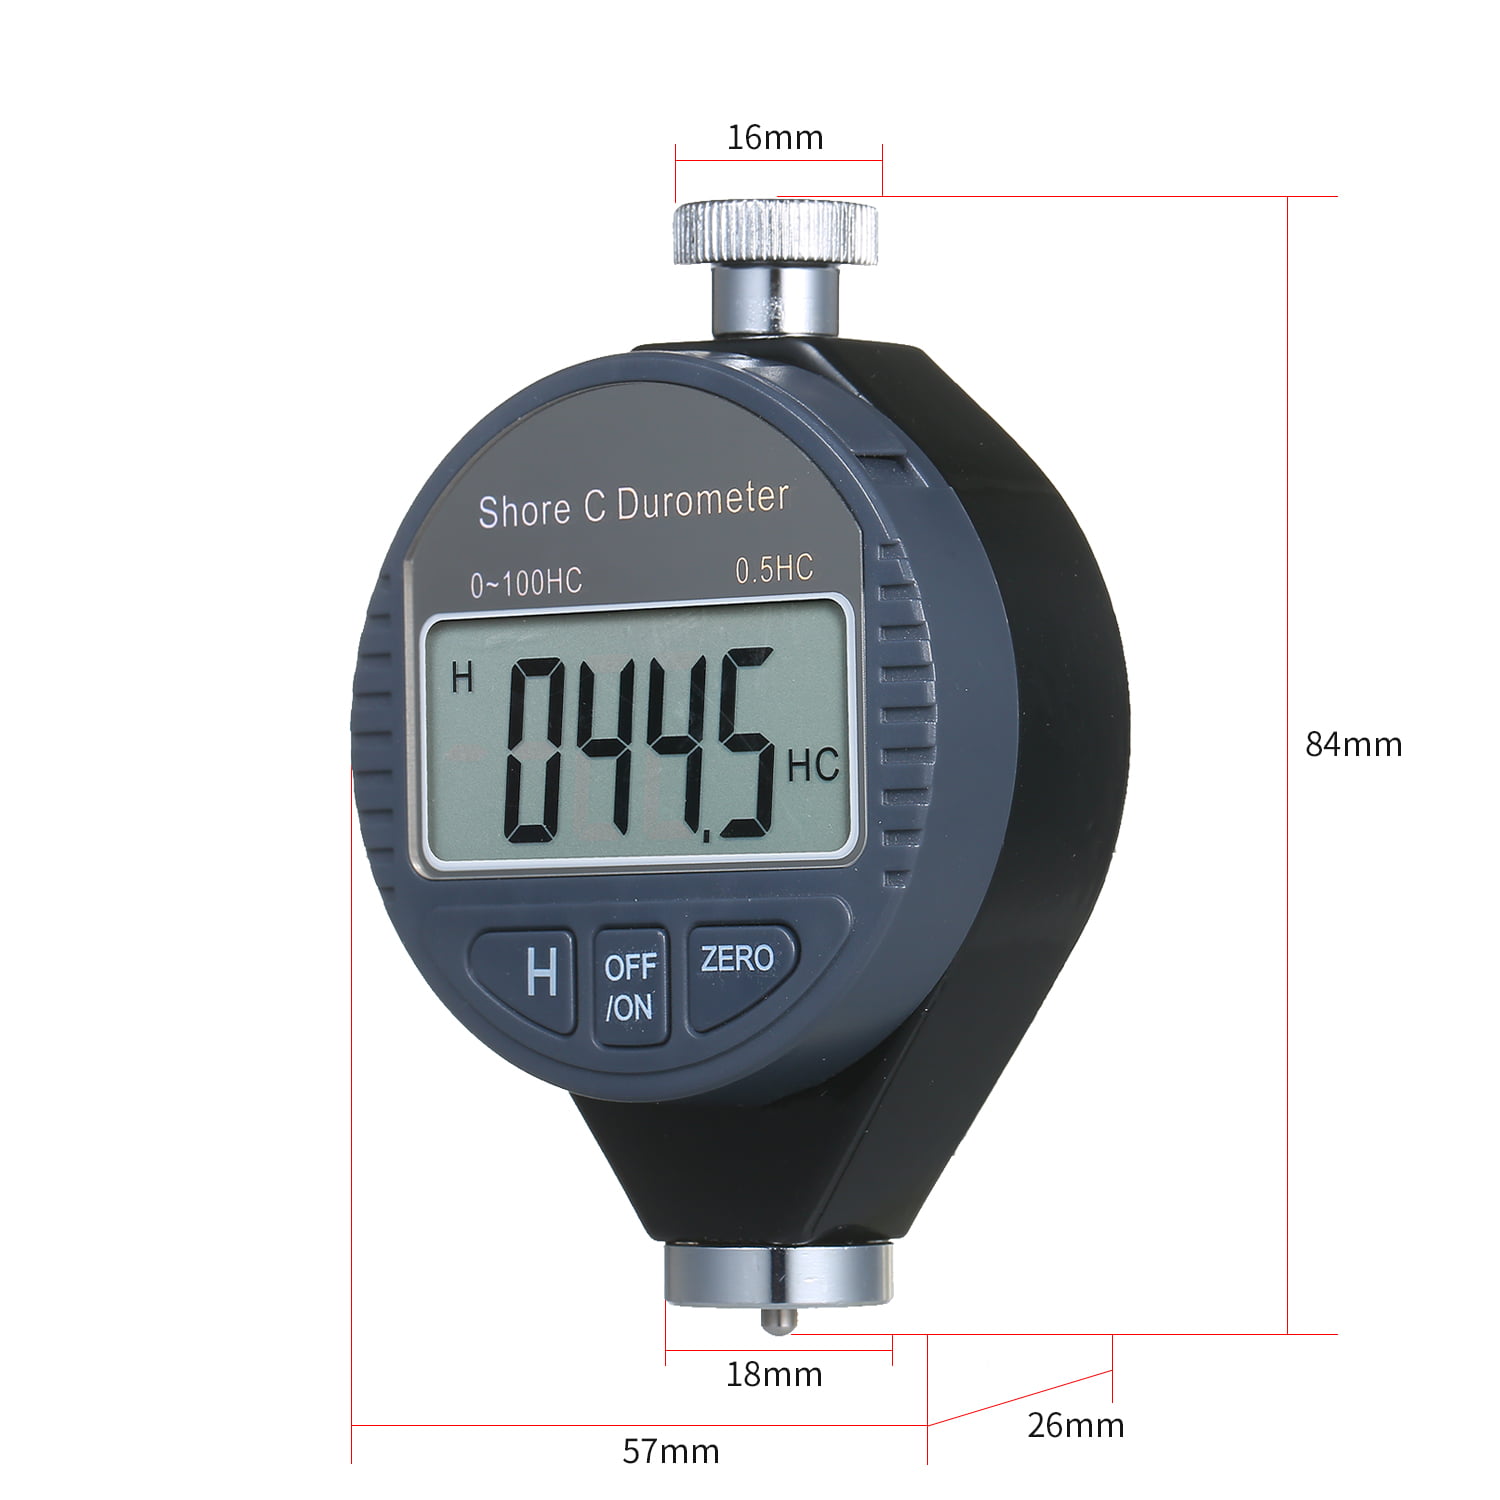 Details about   Portable 0-100HC Shore C Hardness Tester Meter Digital Durometer Scale for Y4Y1 